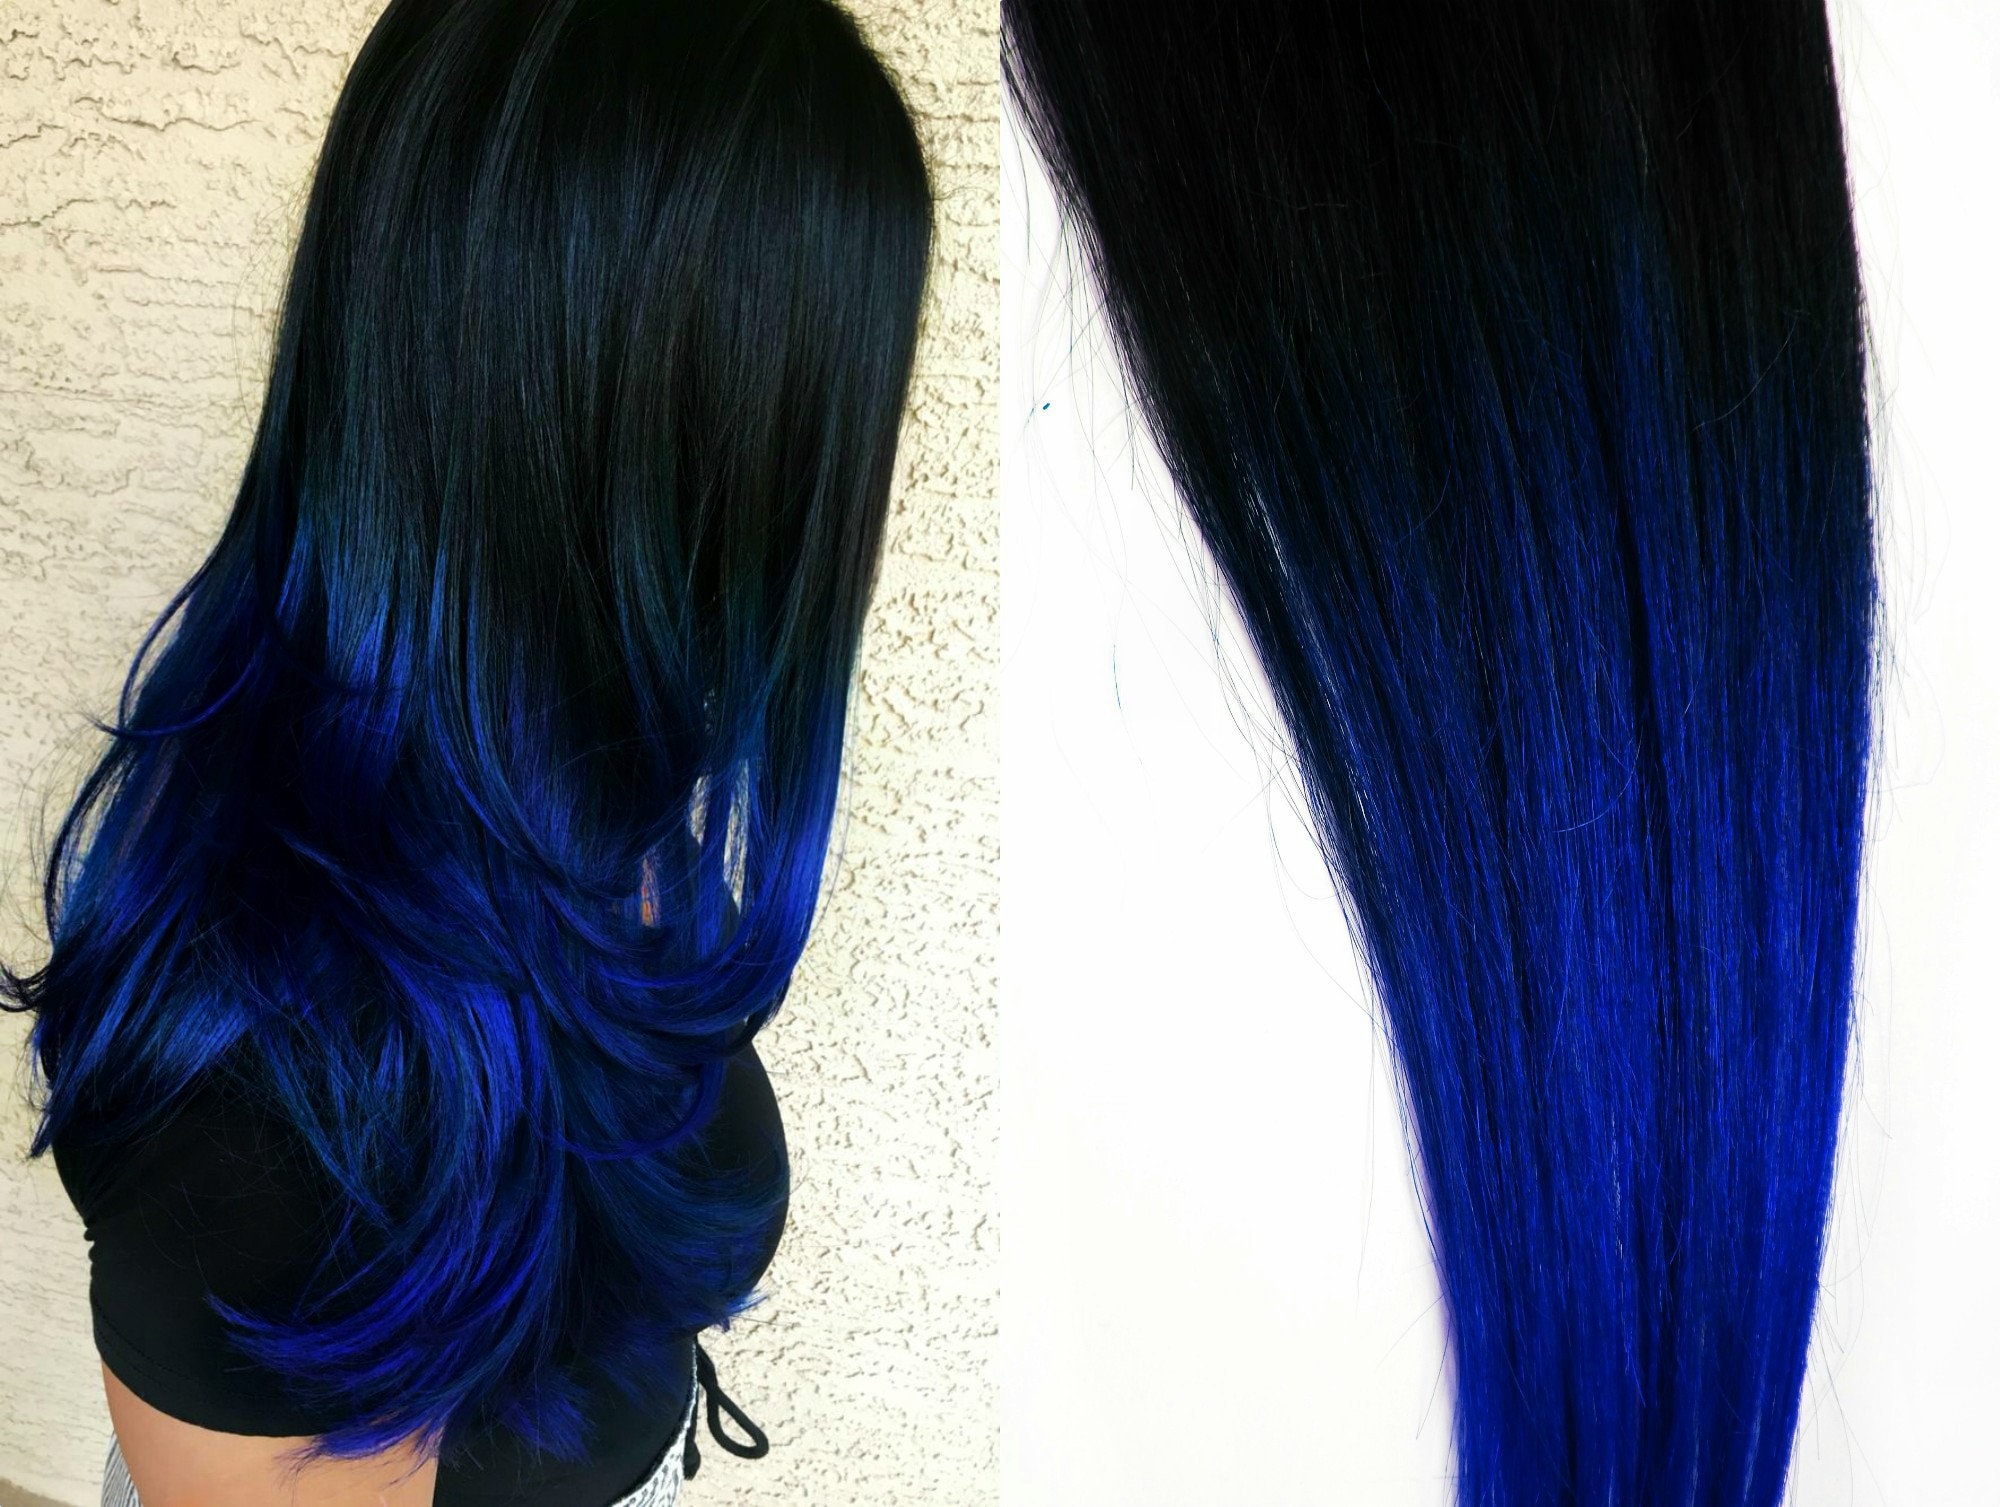 1. Blue Ombre Hair Extensions - wide 7